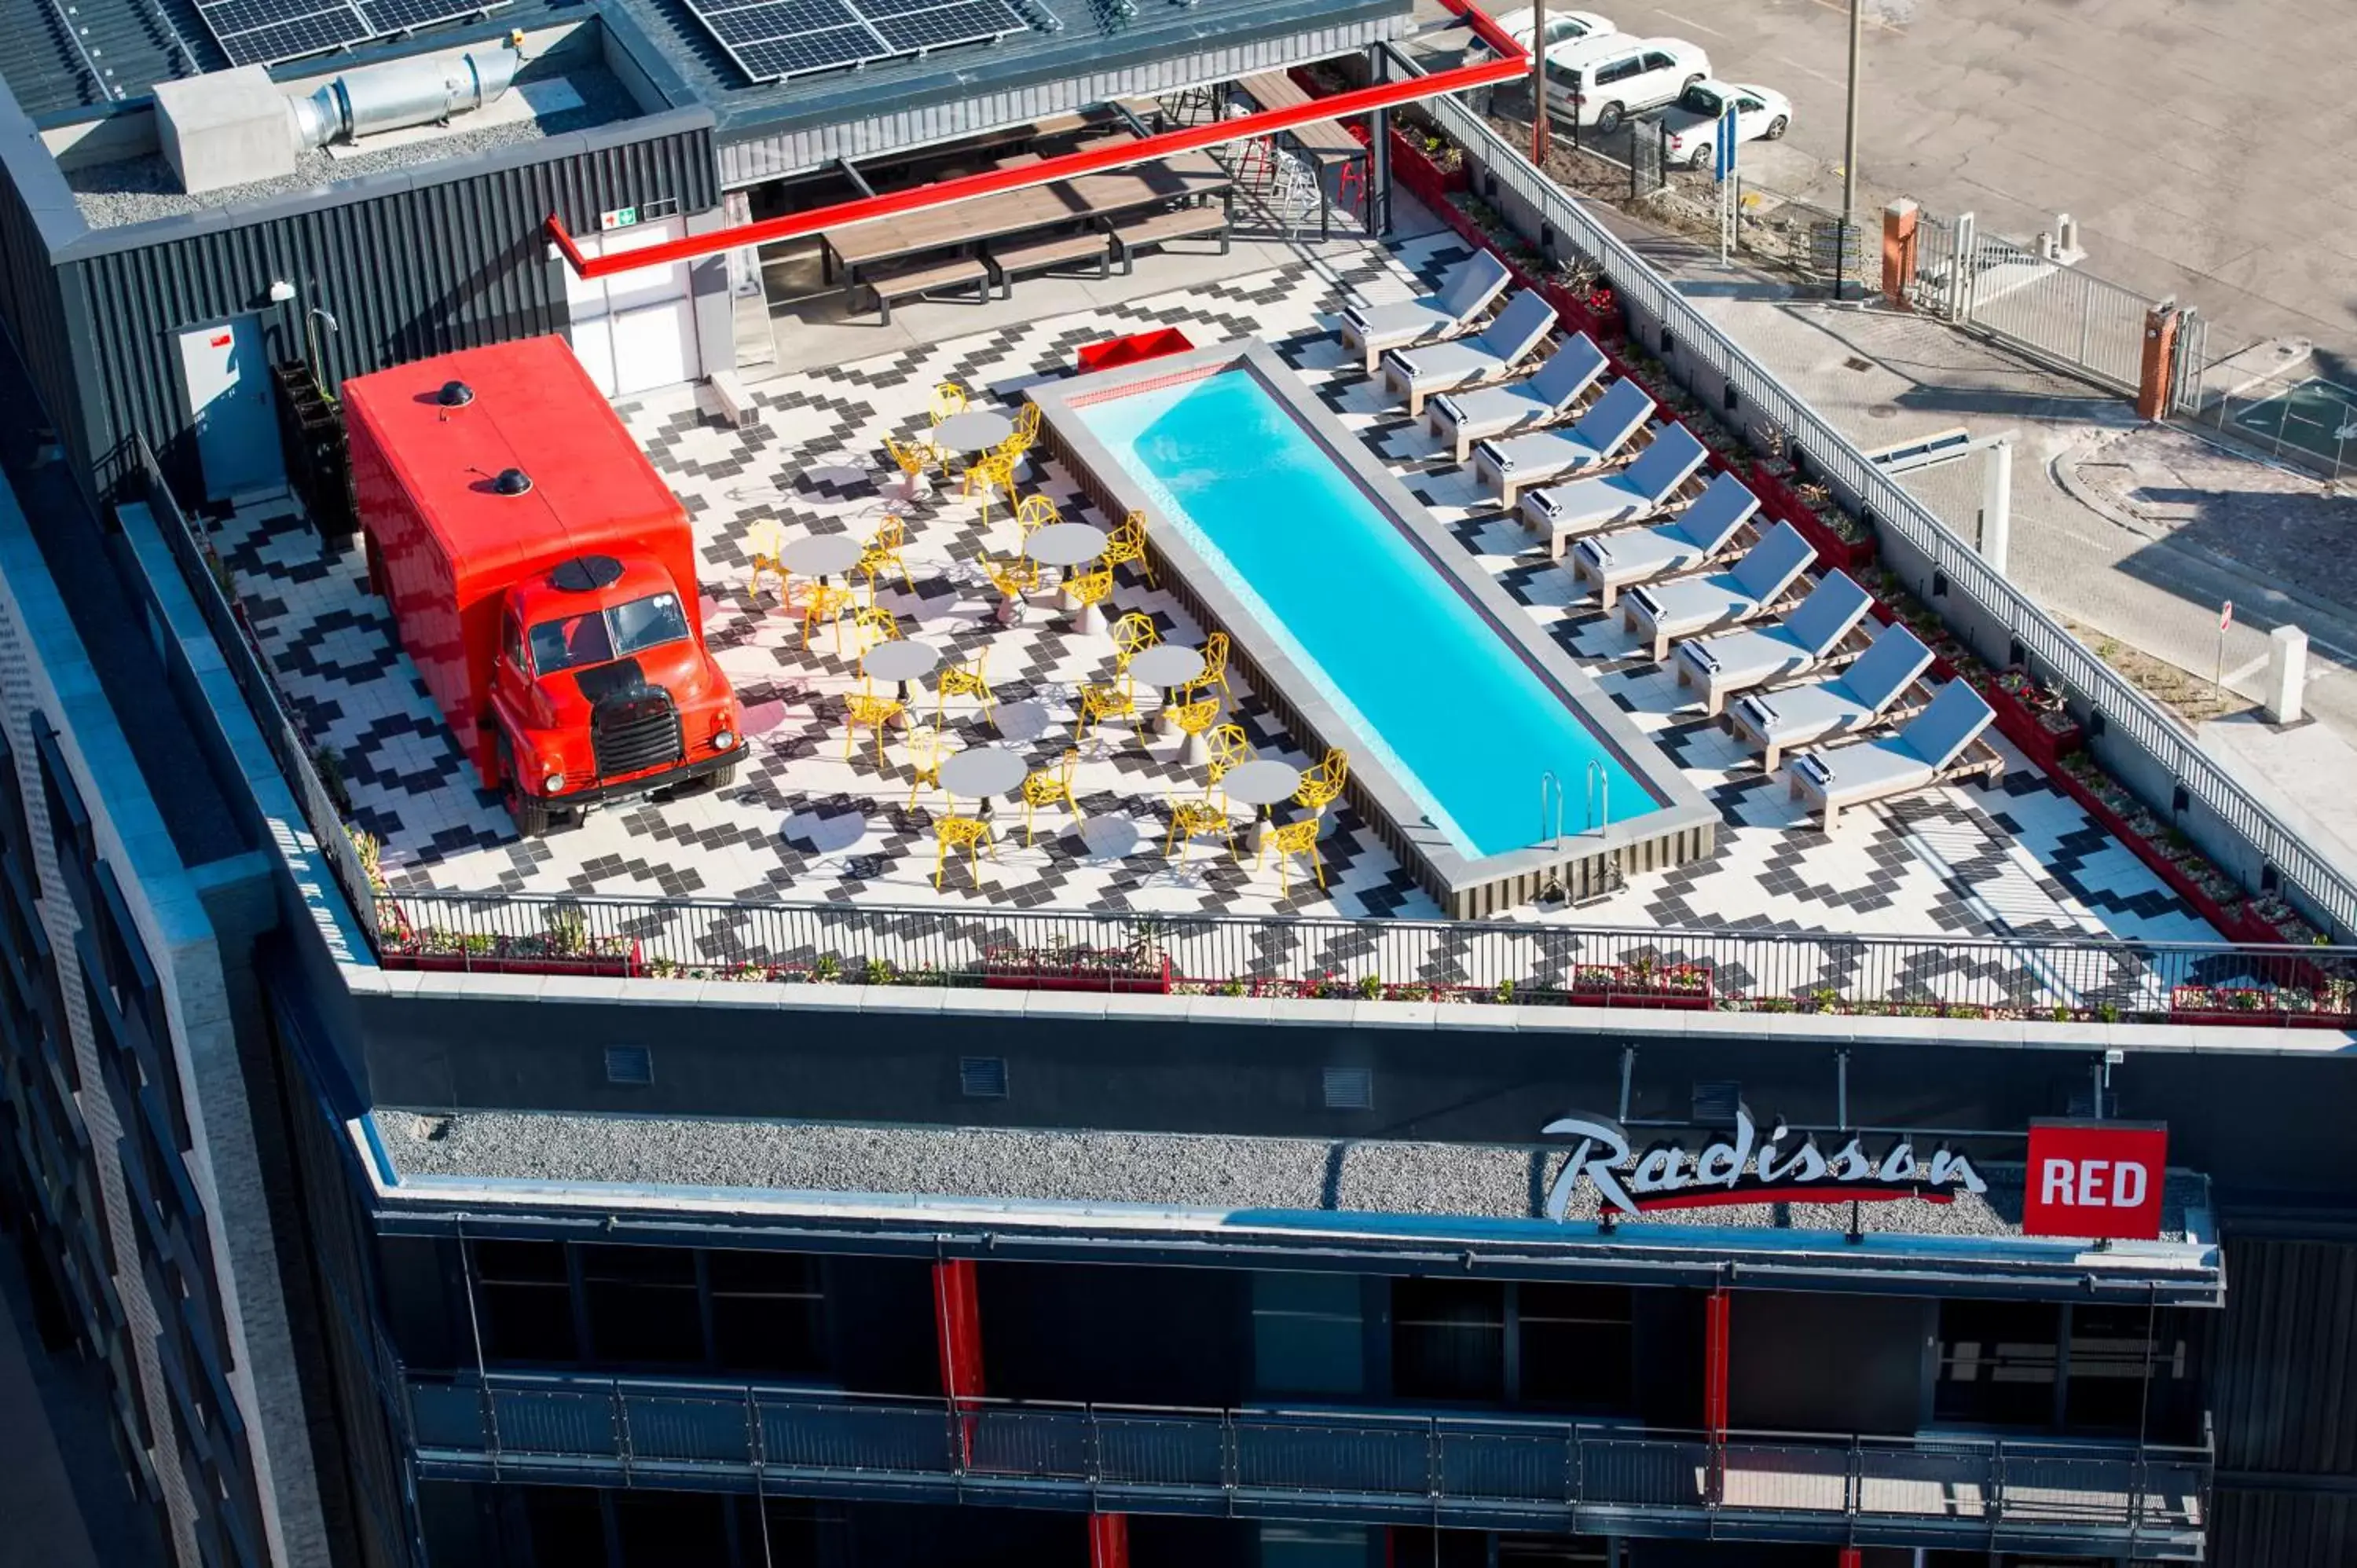 Swimming pool in Radisson RED Hotel V&A Waterfront Cape Town